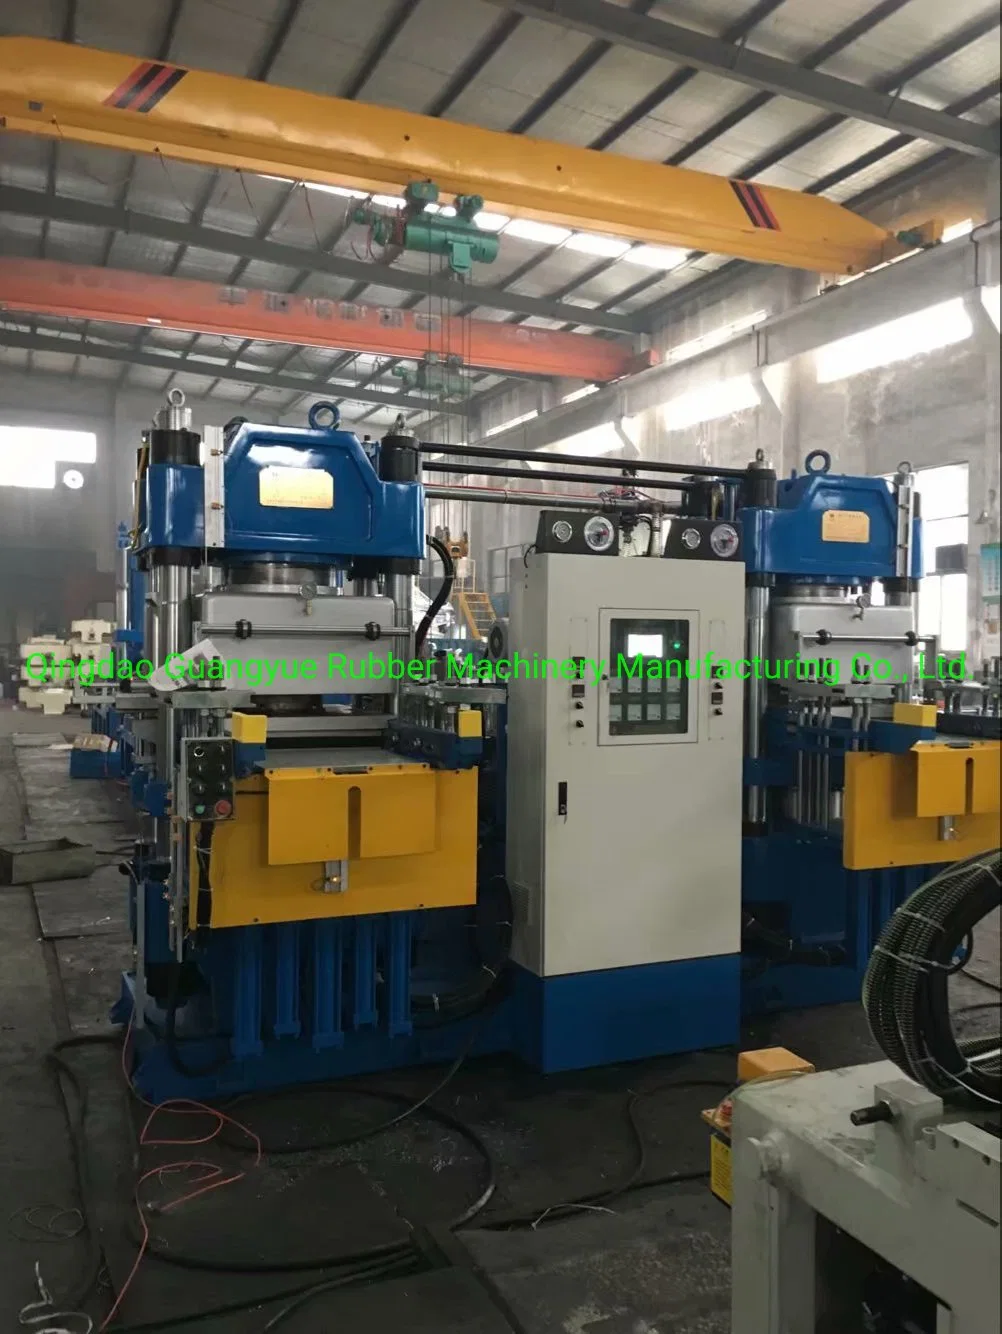 Fully Automatic Horizontal Silicone Rubber Injection Molding Machine